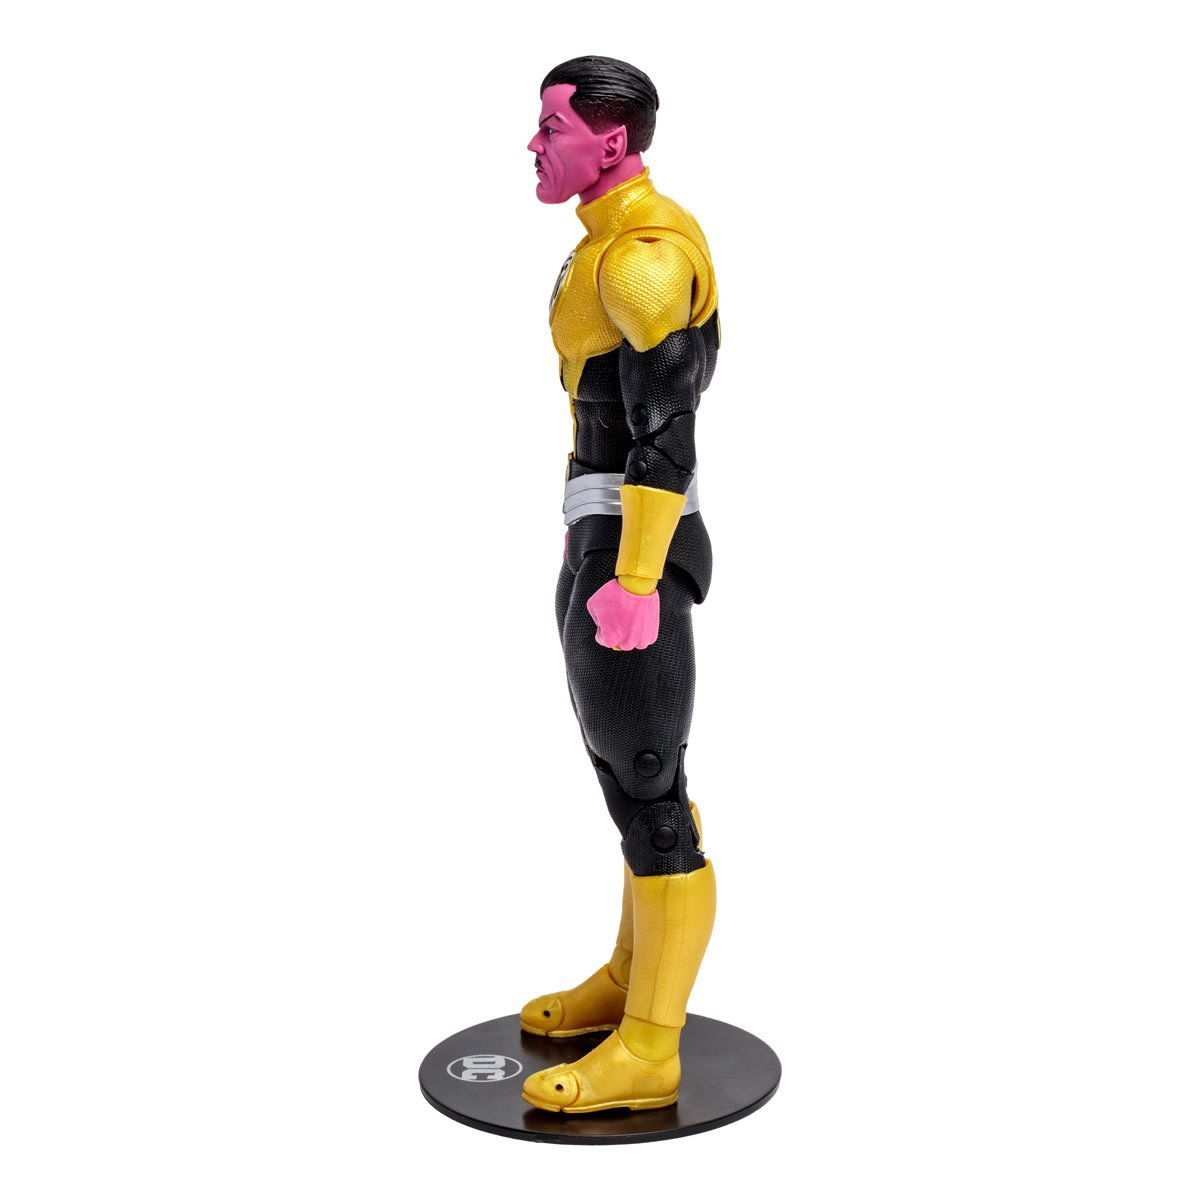 MCFARLANE DC McFarlane Collector Edition Wave 2 Sinestro Corps War 7-Inch Scale Action Figure